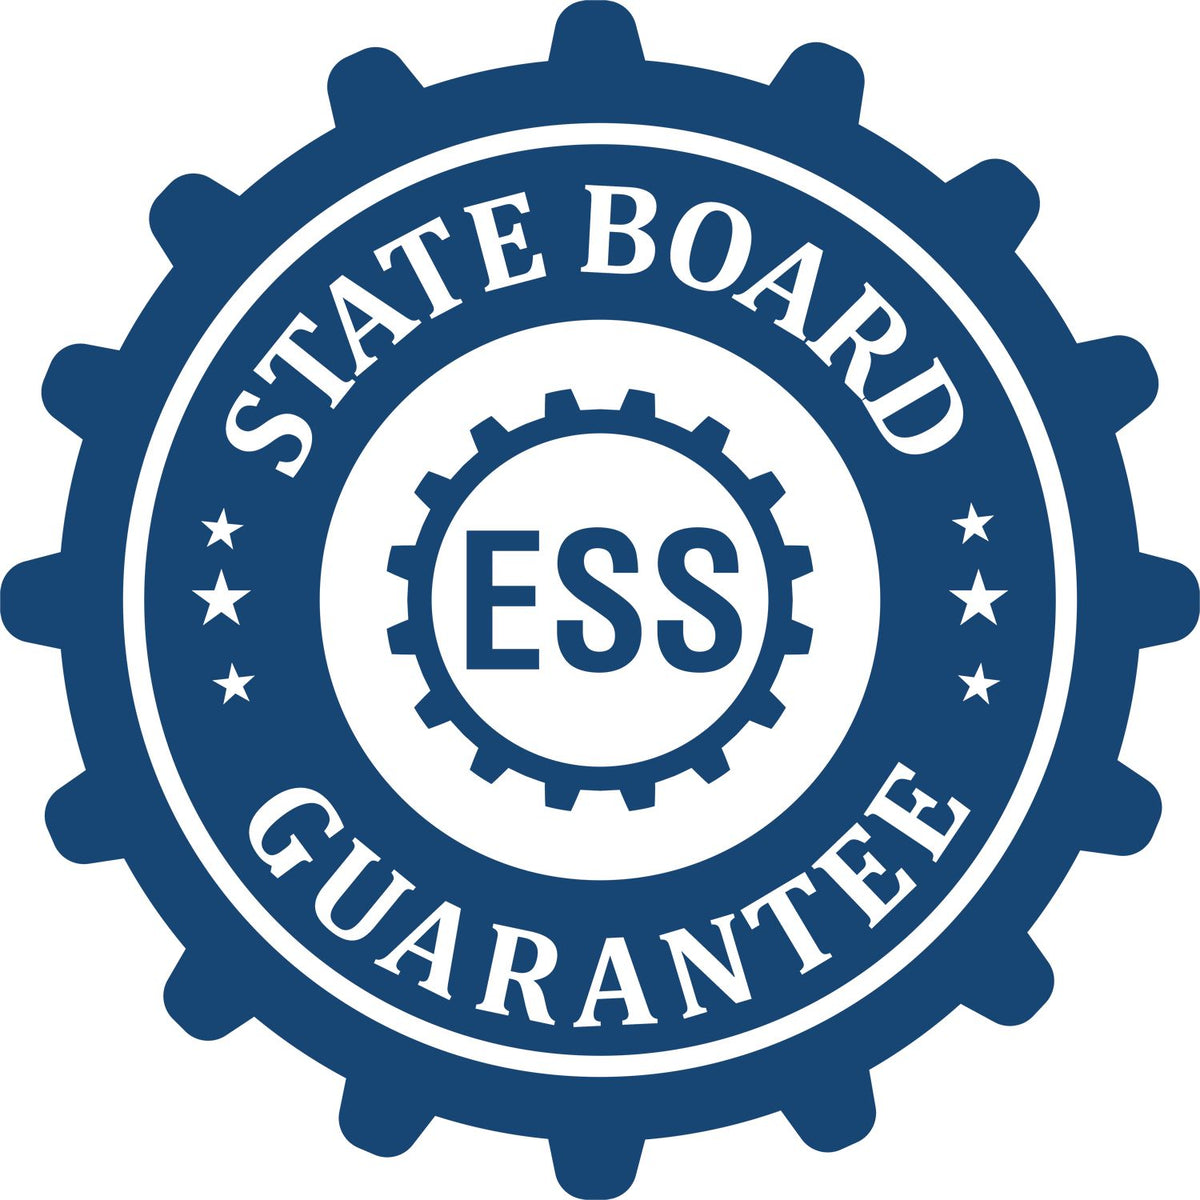 An emblem in a gear shape illustrating a state board guarantee for the Digital Kentucky PE Stamp and Electronic Seal for Kentucky Engineer product.